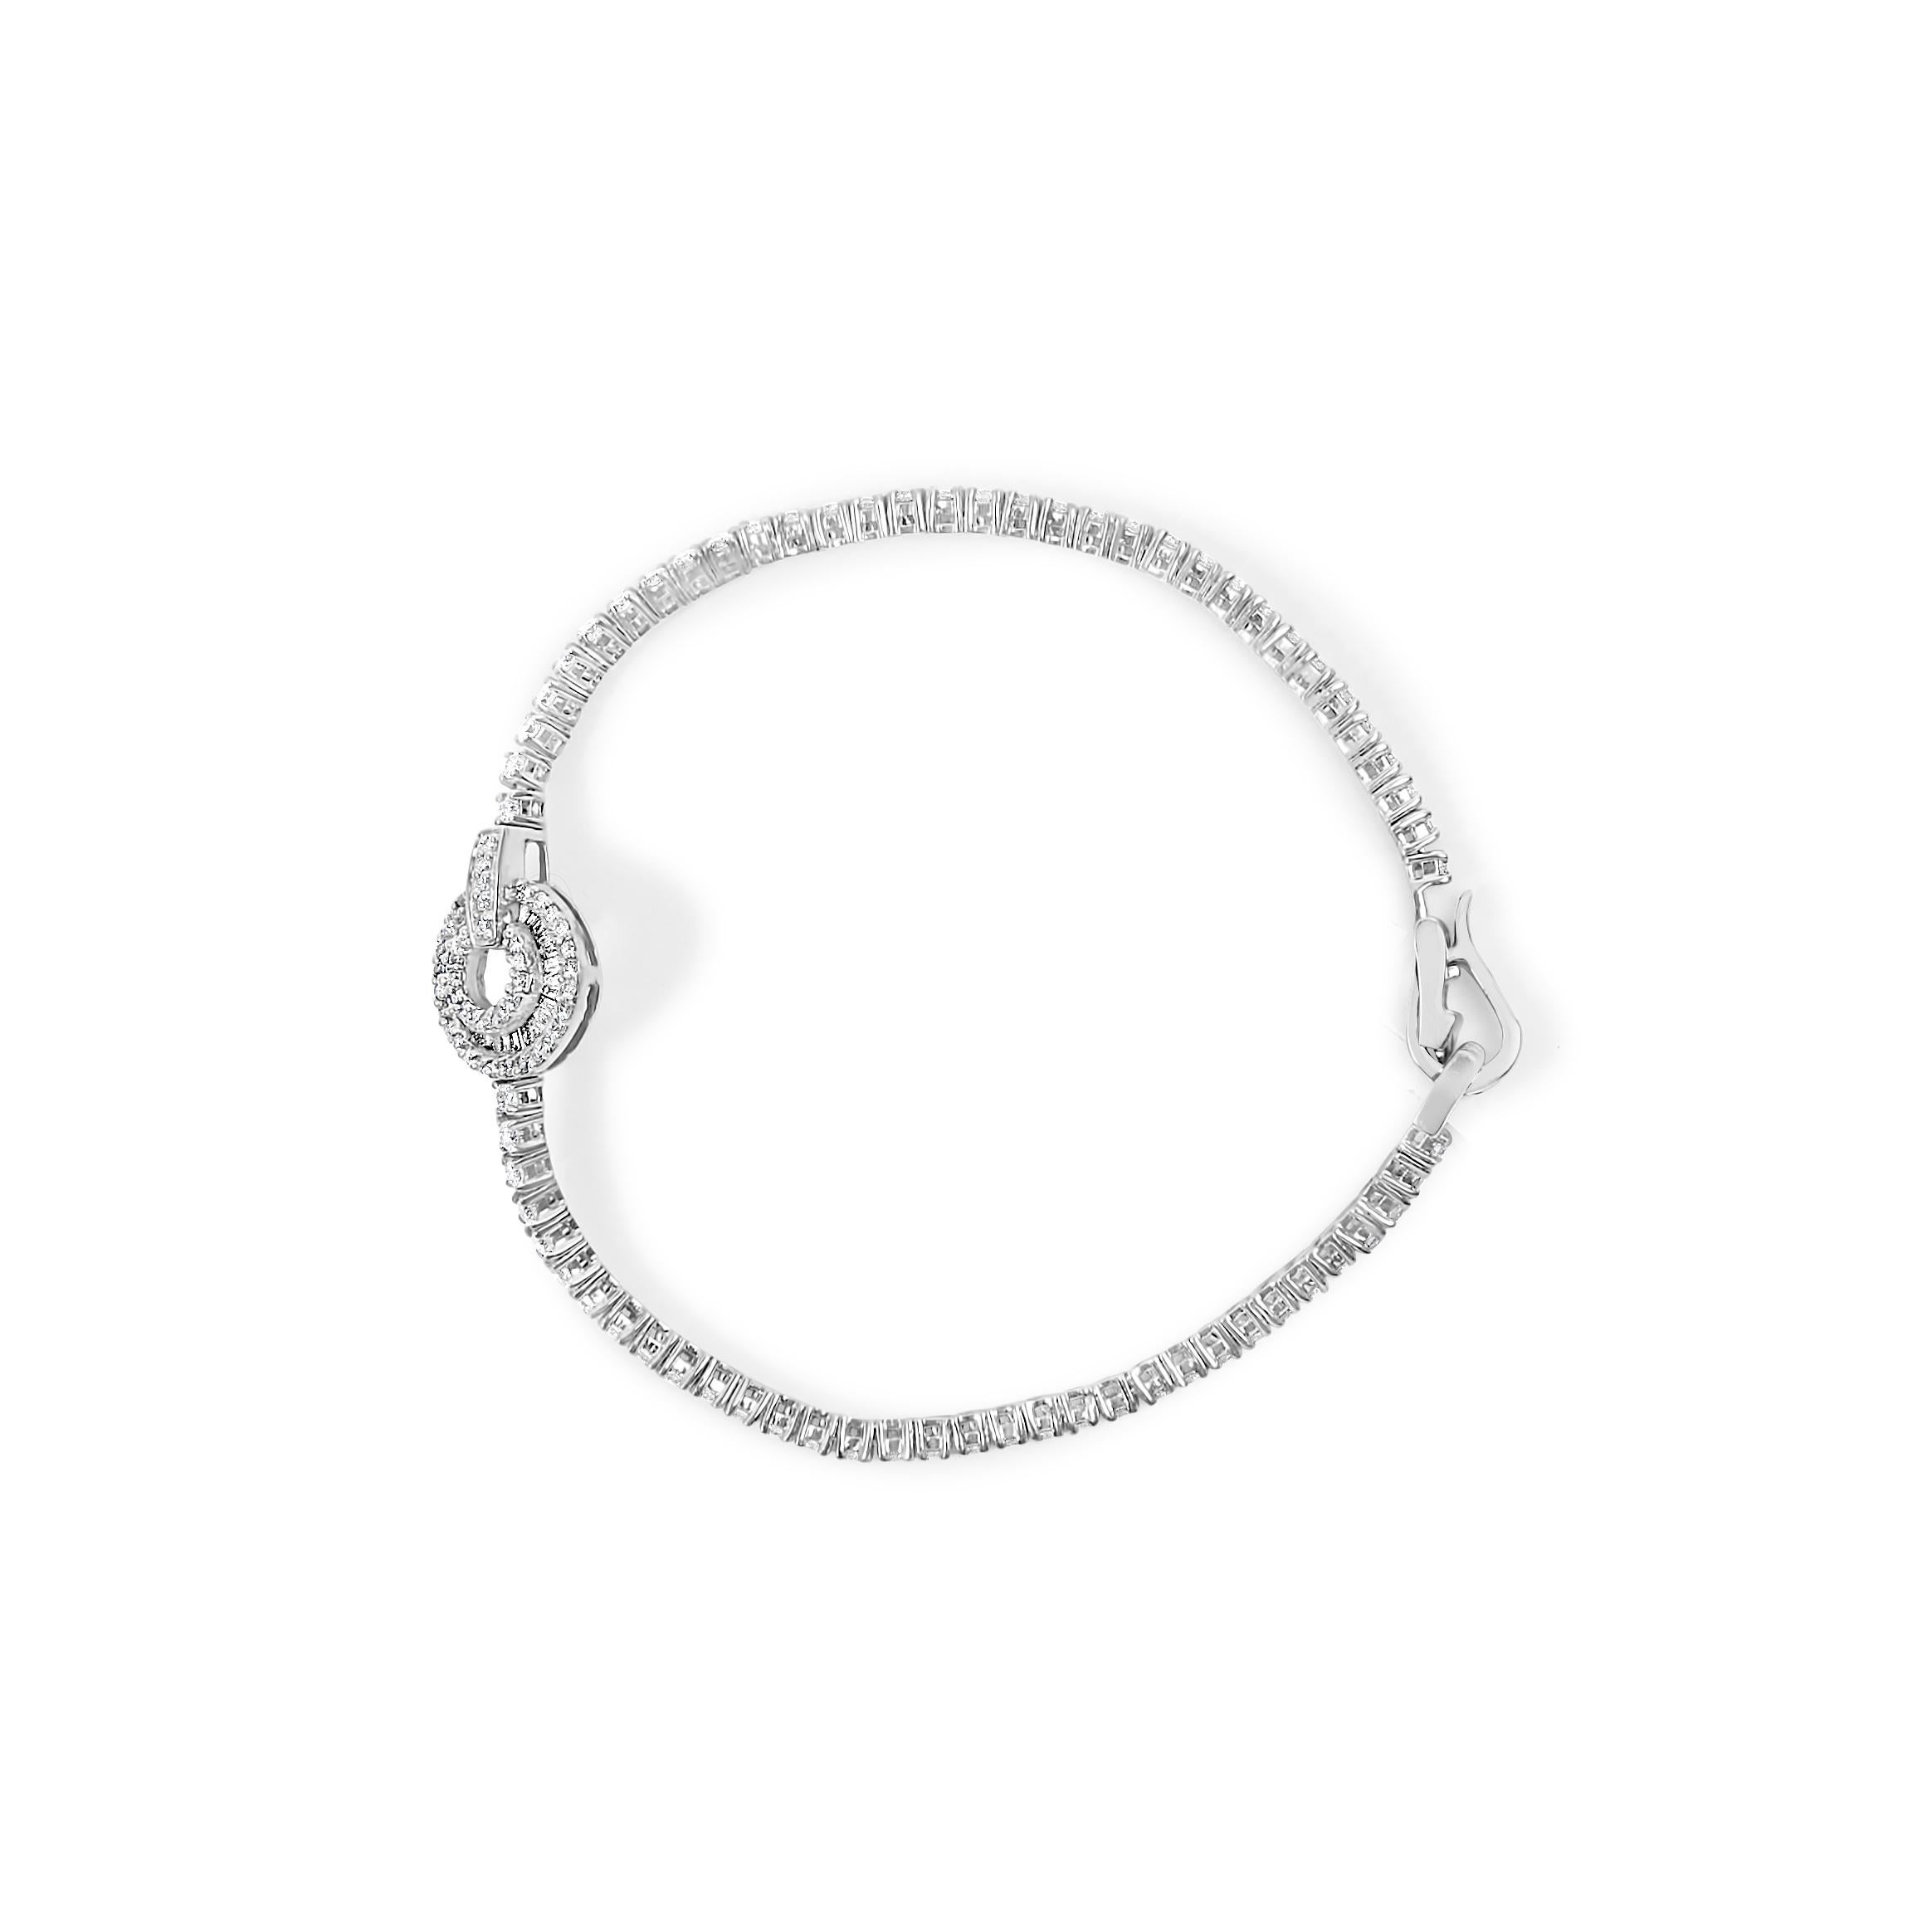 Contemporary 14K White Gold 2 1/2 Cttw Diamond Classic Tennis Bracelet with Medallion Station For Sale